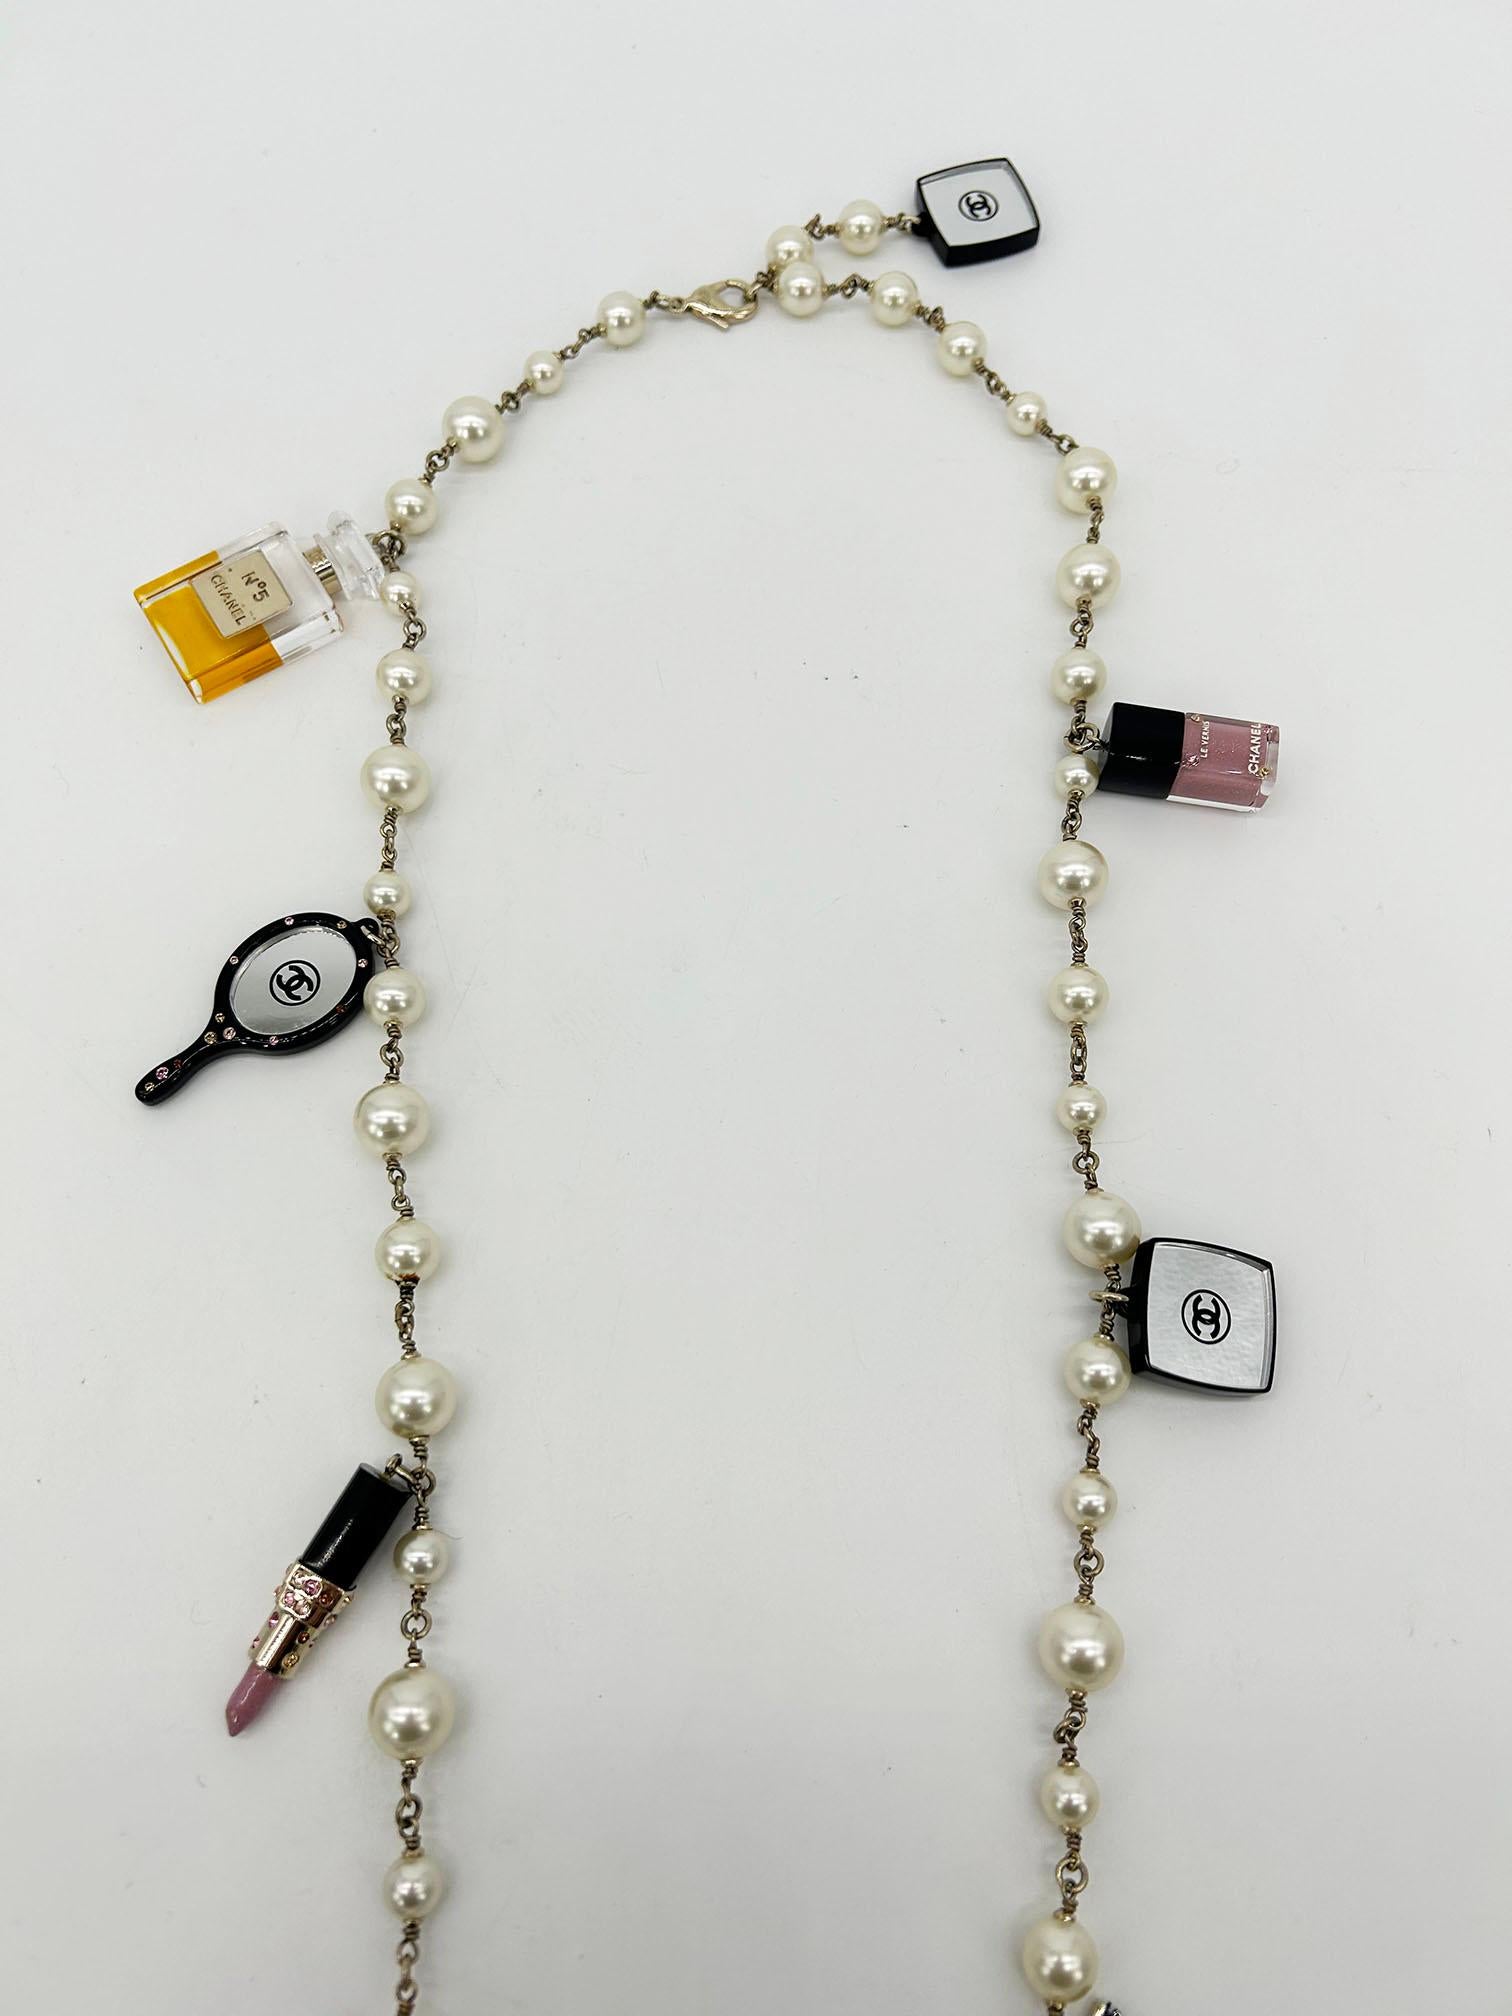 Chanel Vintage Make Up Charm Beaded Pearl Chain Necklace In Excellent Condition For Sale In Philadelphia, PA